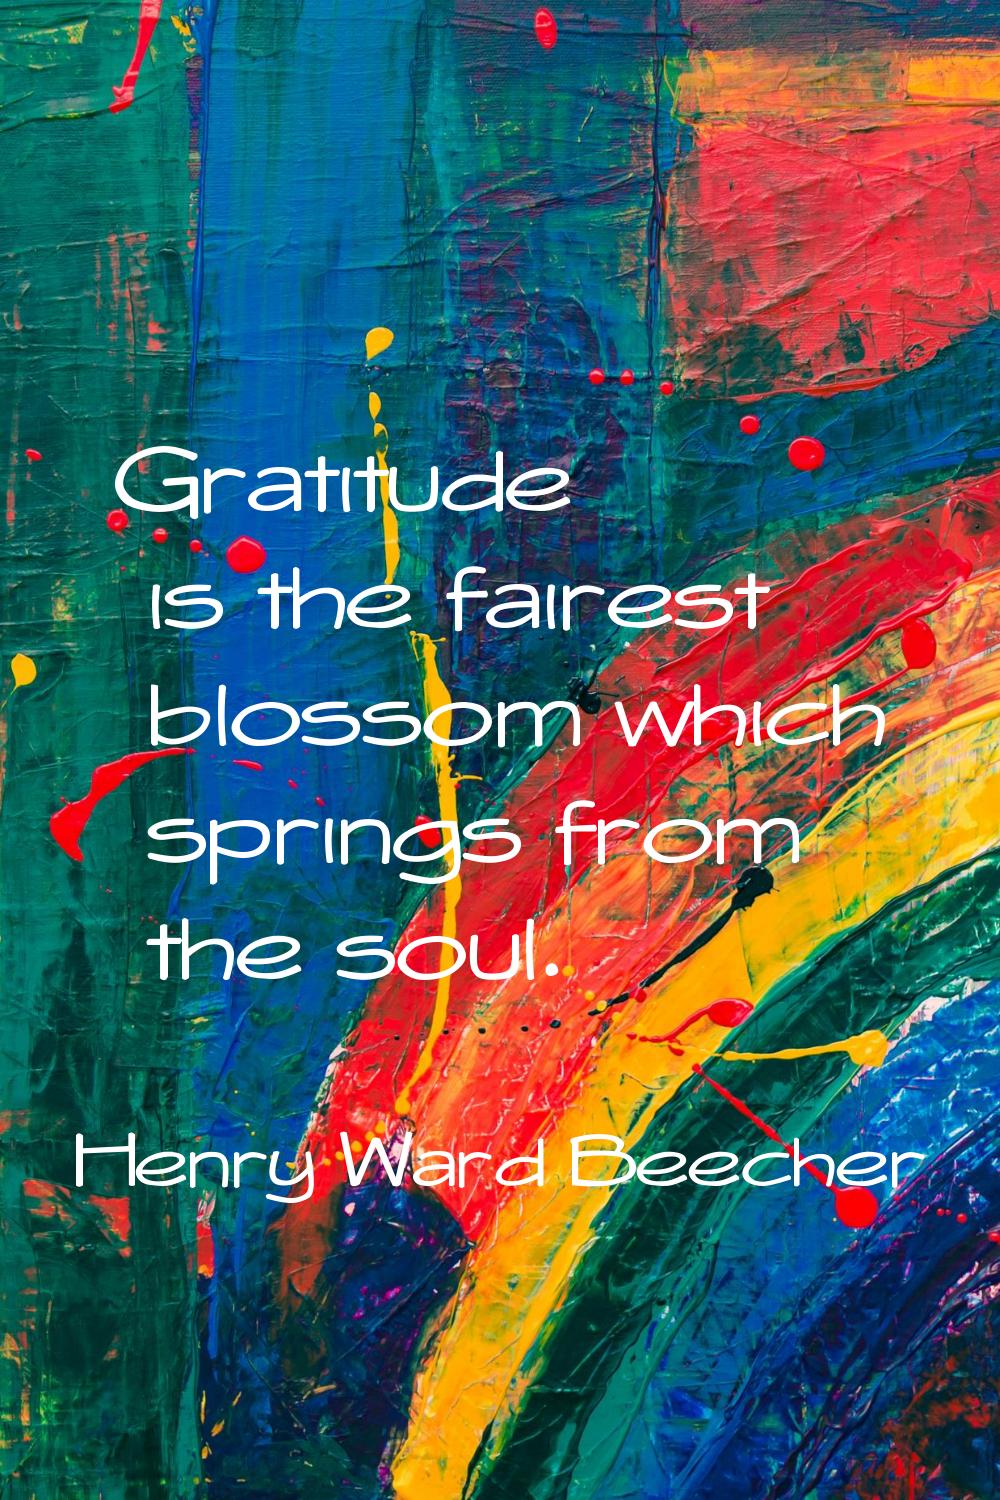 Gratitude is the fairest blossom which springs from the soul.